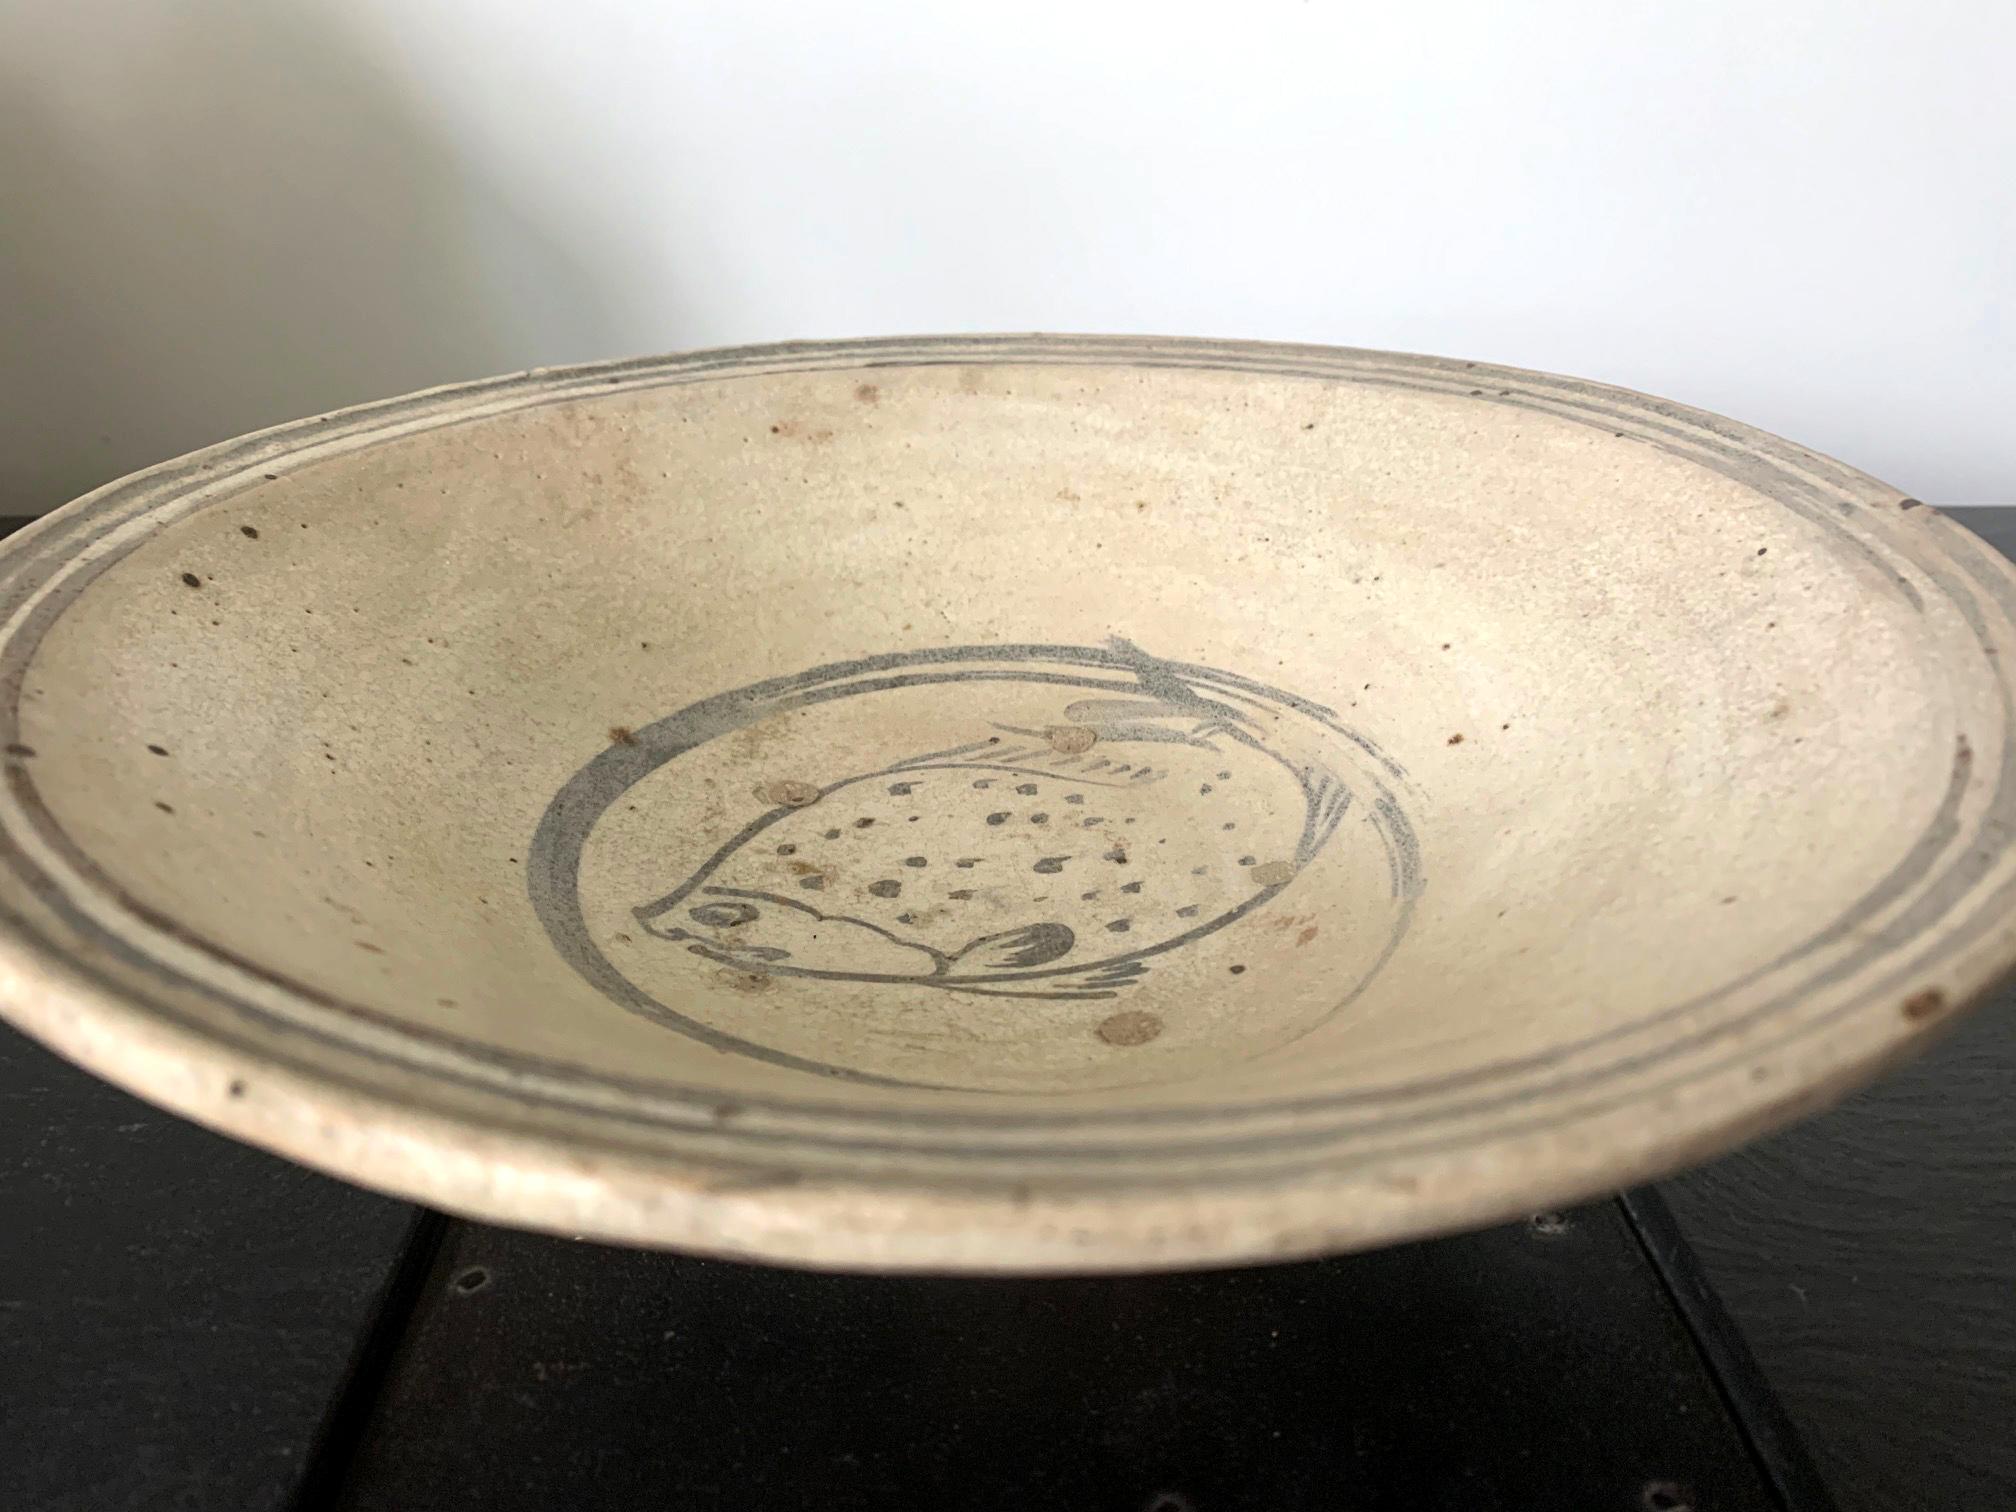 A shallow ceramic bowl from Sukhothai period of Thailand circa 14th-15th century. The dish was hand molded with a coarse pinkish clay and it has a white slip surface and a blue underglaze decoration. Three circular rings circle the rim and a double